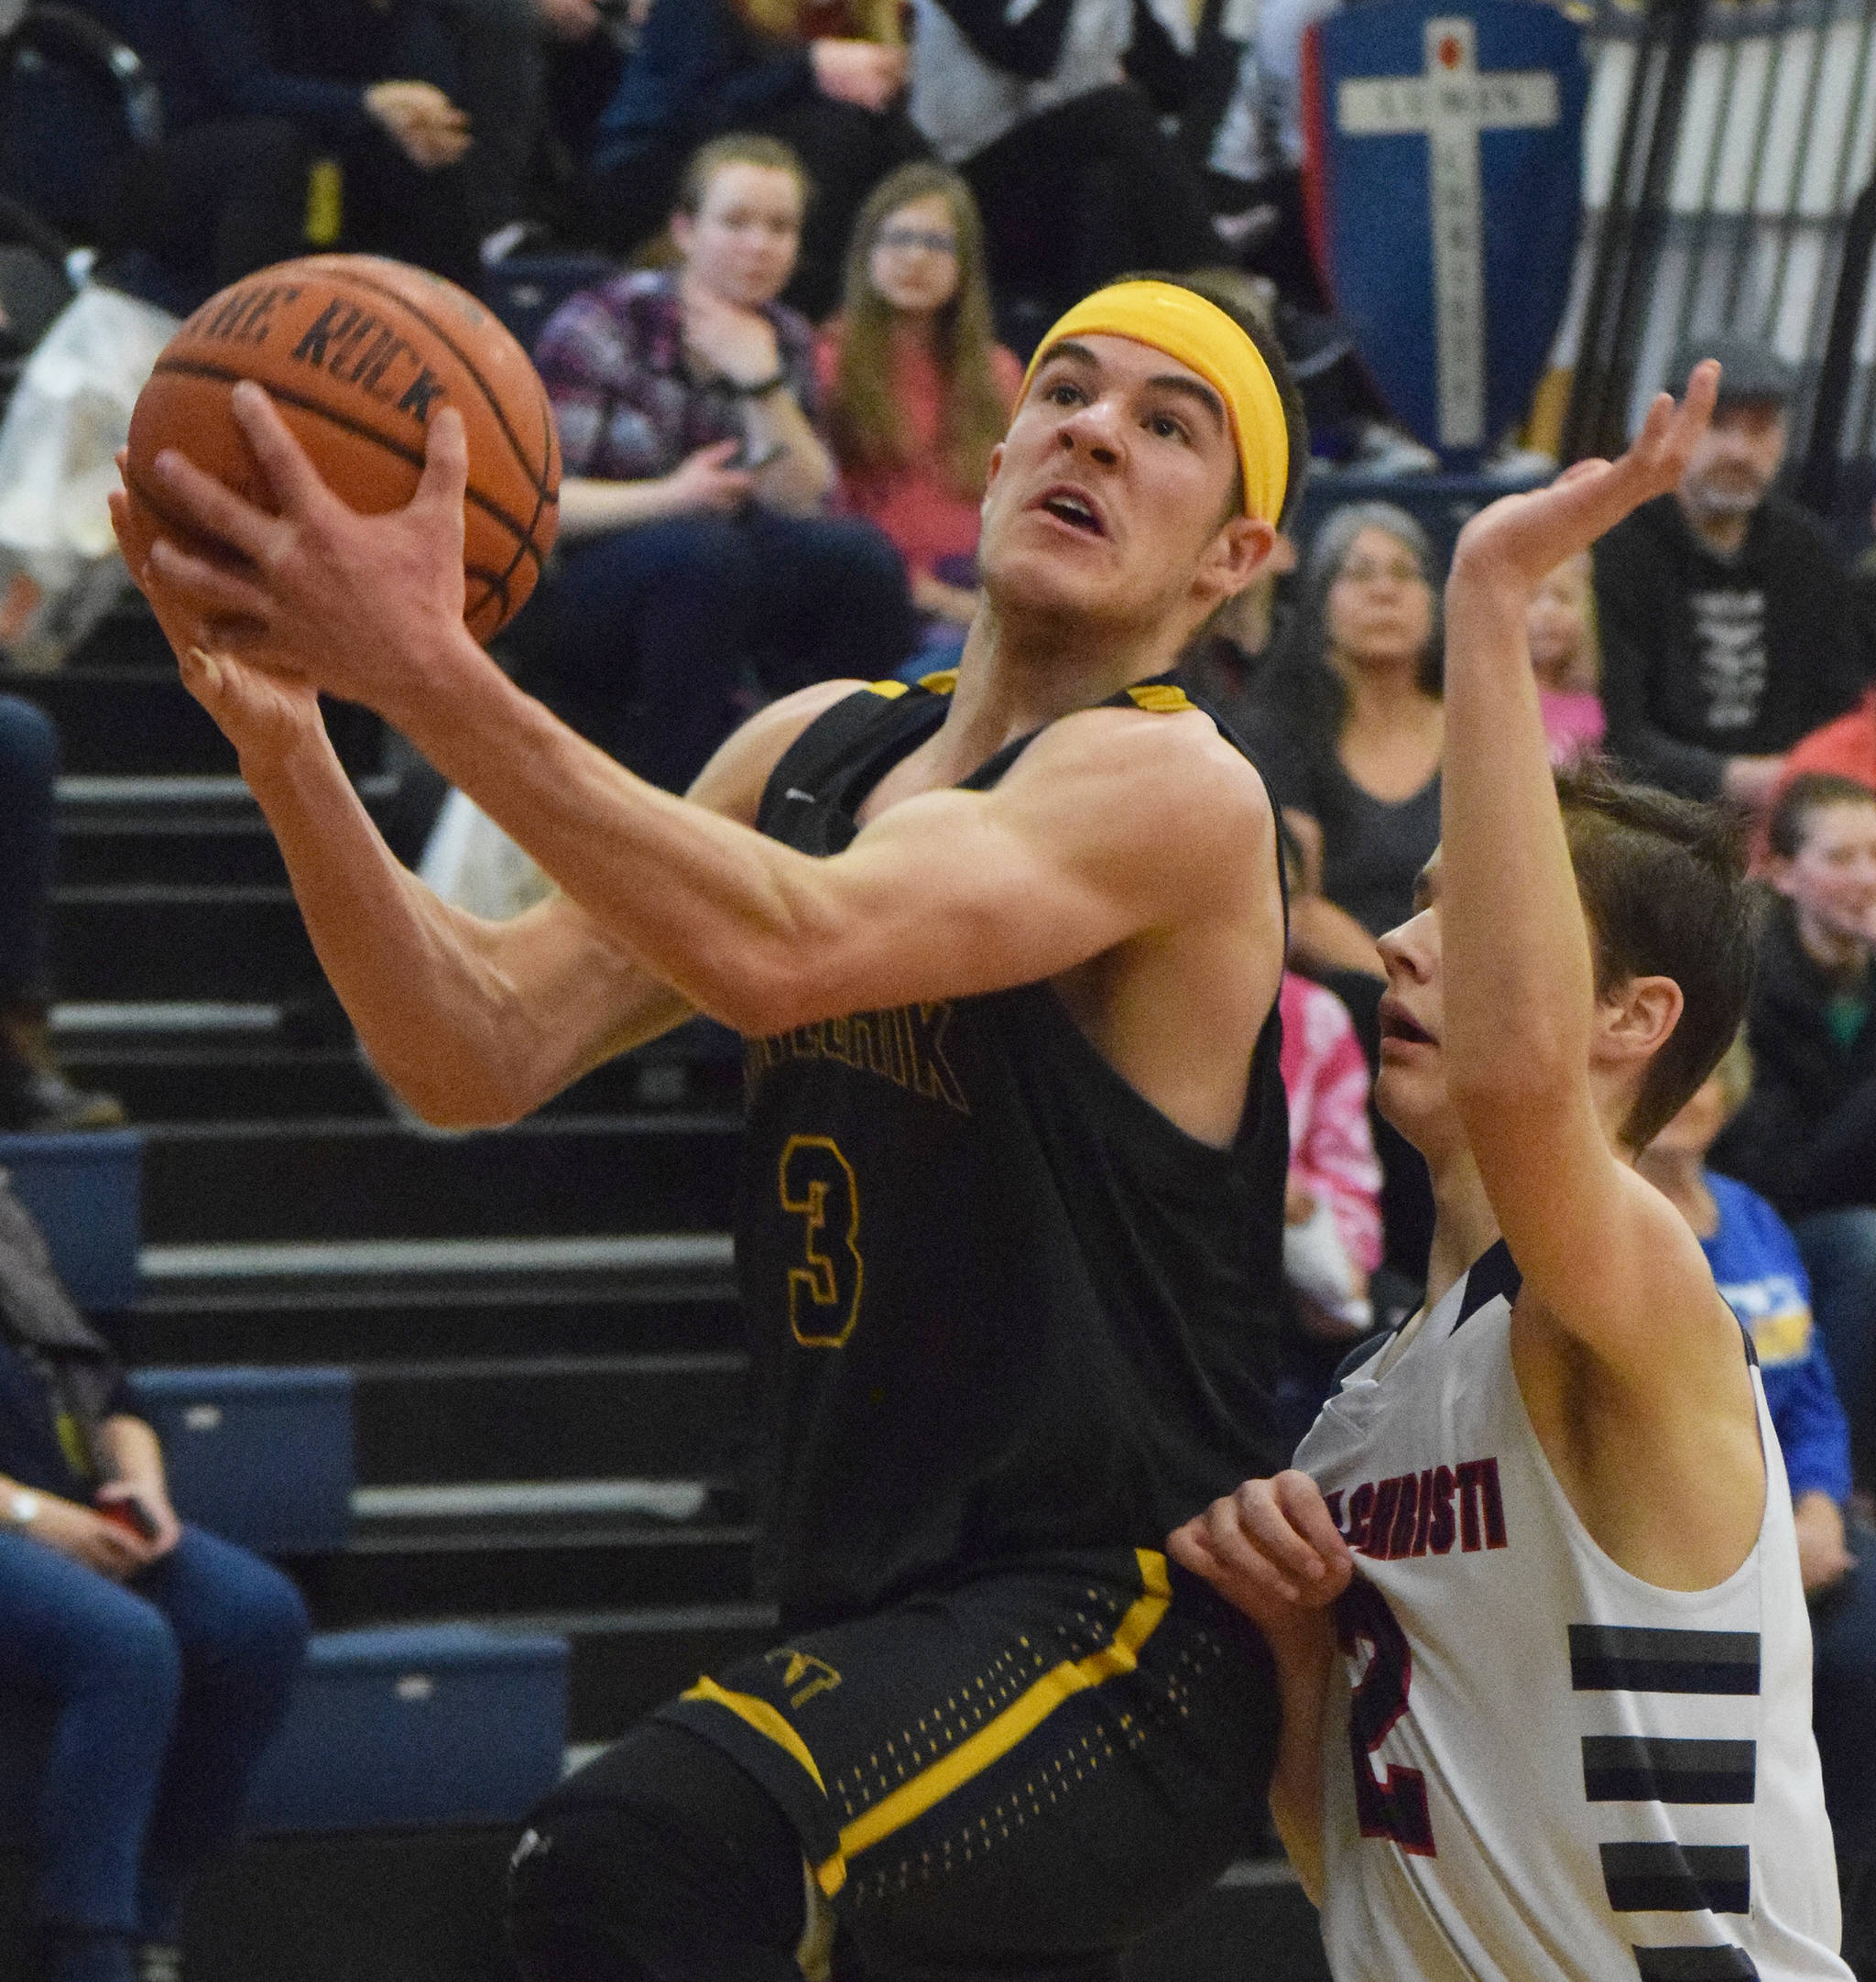 Ninilchik’s Garrett Koch (left) drives to the rim against Lumen Christi defender Brendon Gregory Saturday in the boys Peninsula Conference second-place contest. (Photo by Joey Klecka/Peninsula Clarion)